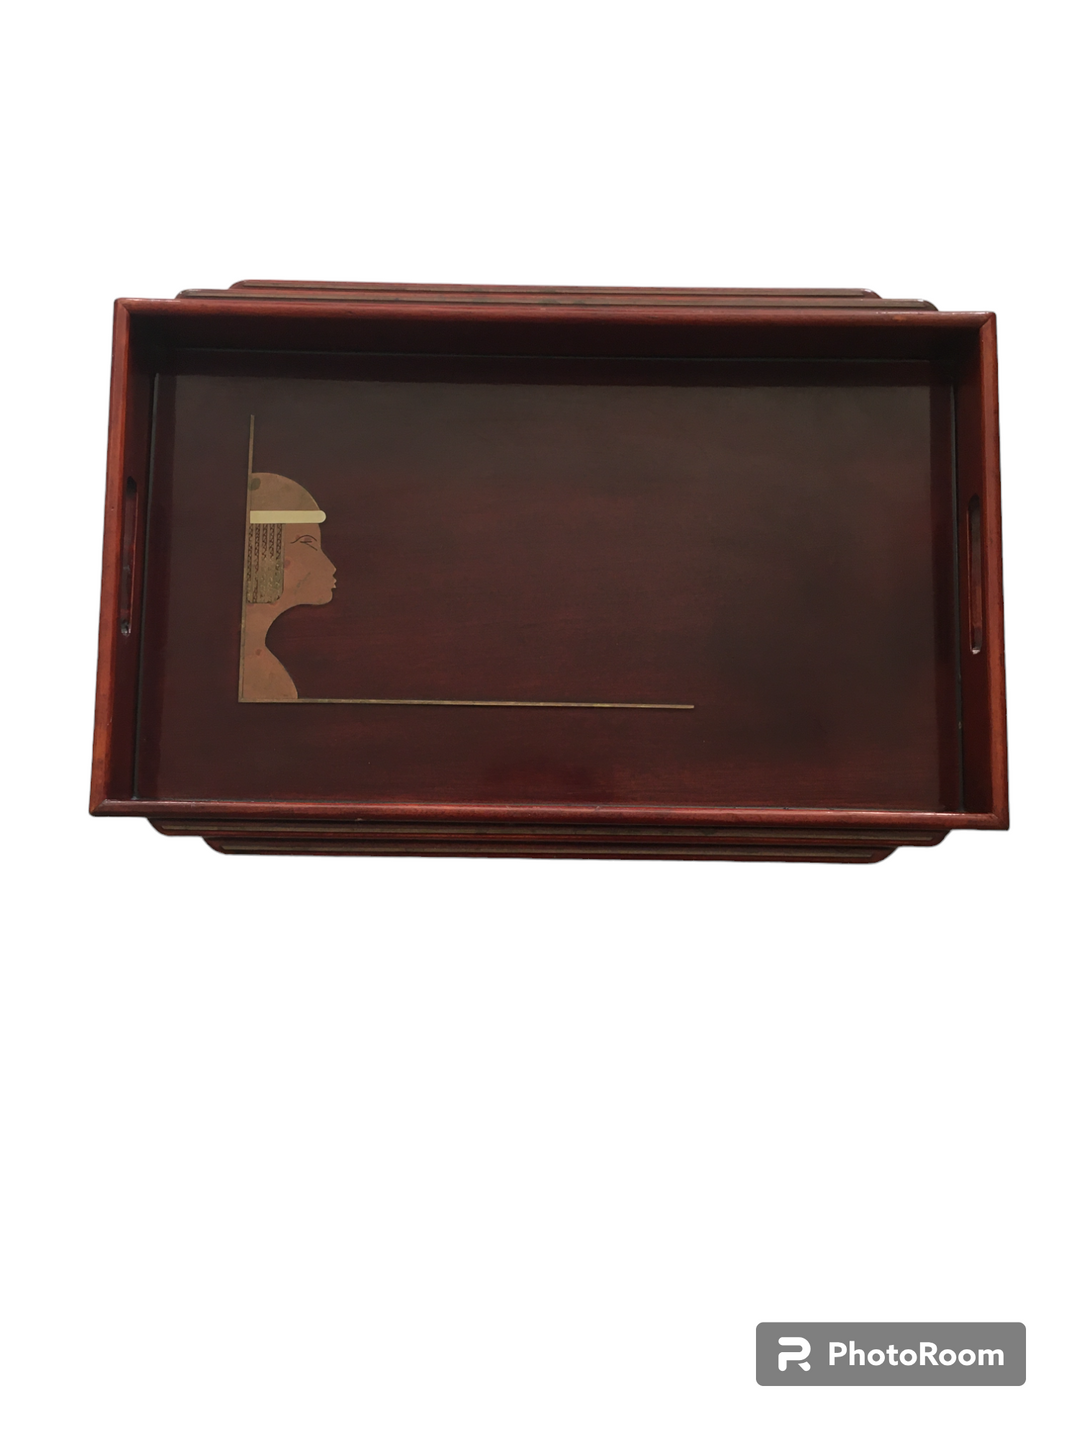 Art Deco Lacquer Wood Tray with Inlay Design Accent